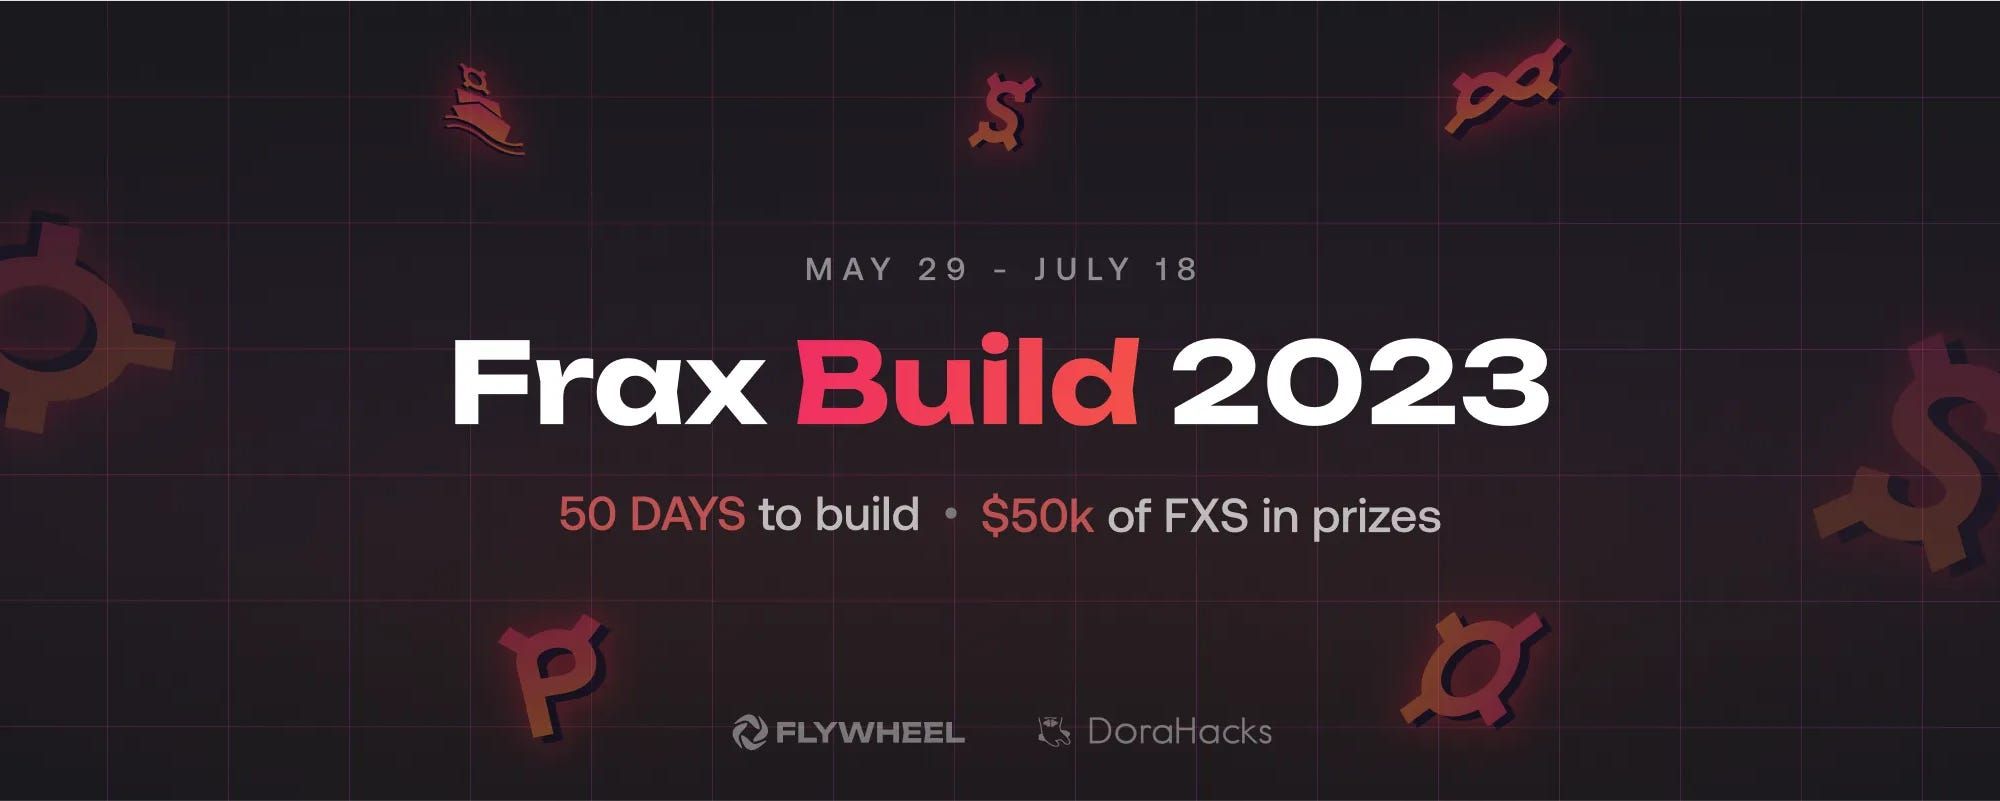 FraxBuild Hackathon Launches! Here is What You Need To Know